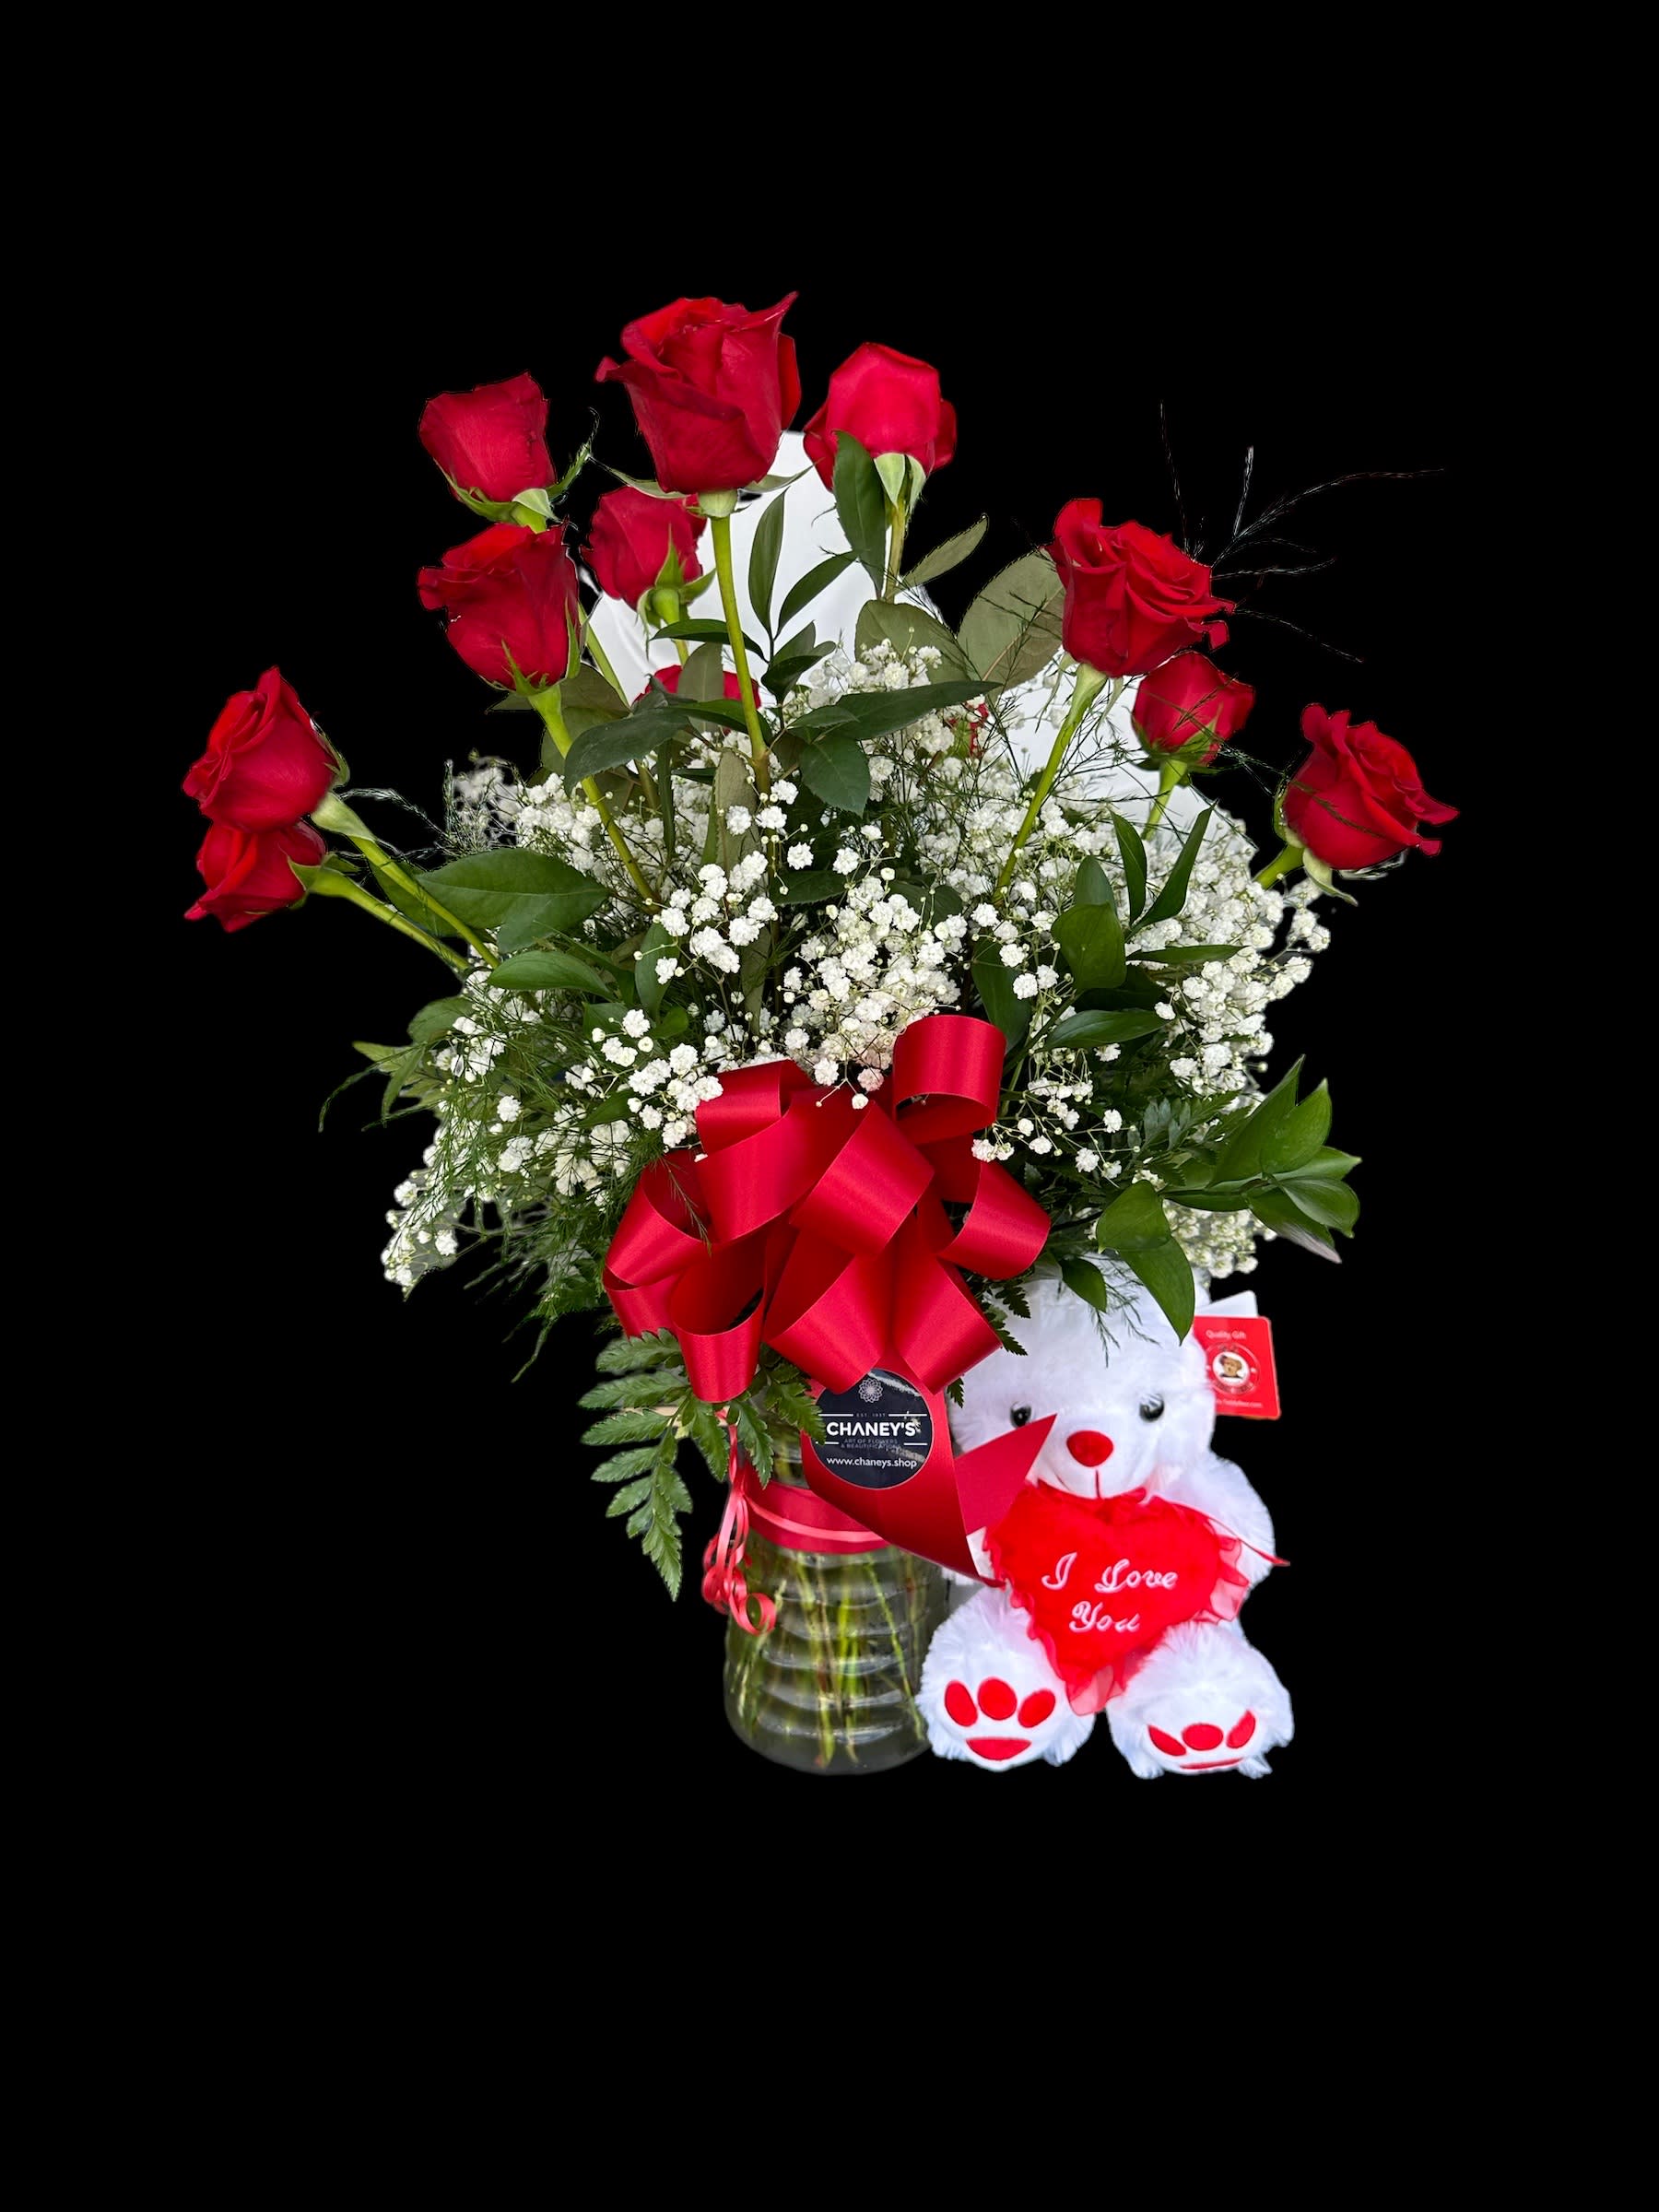 Chaney´s Red Romance 1008 - a dozen beautiful red roses arranged with a little green and a cute teddy bear attached. Hi great way to send a floral message!